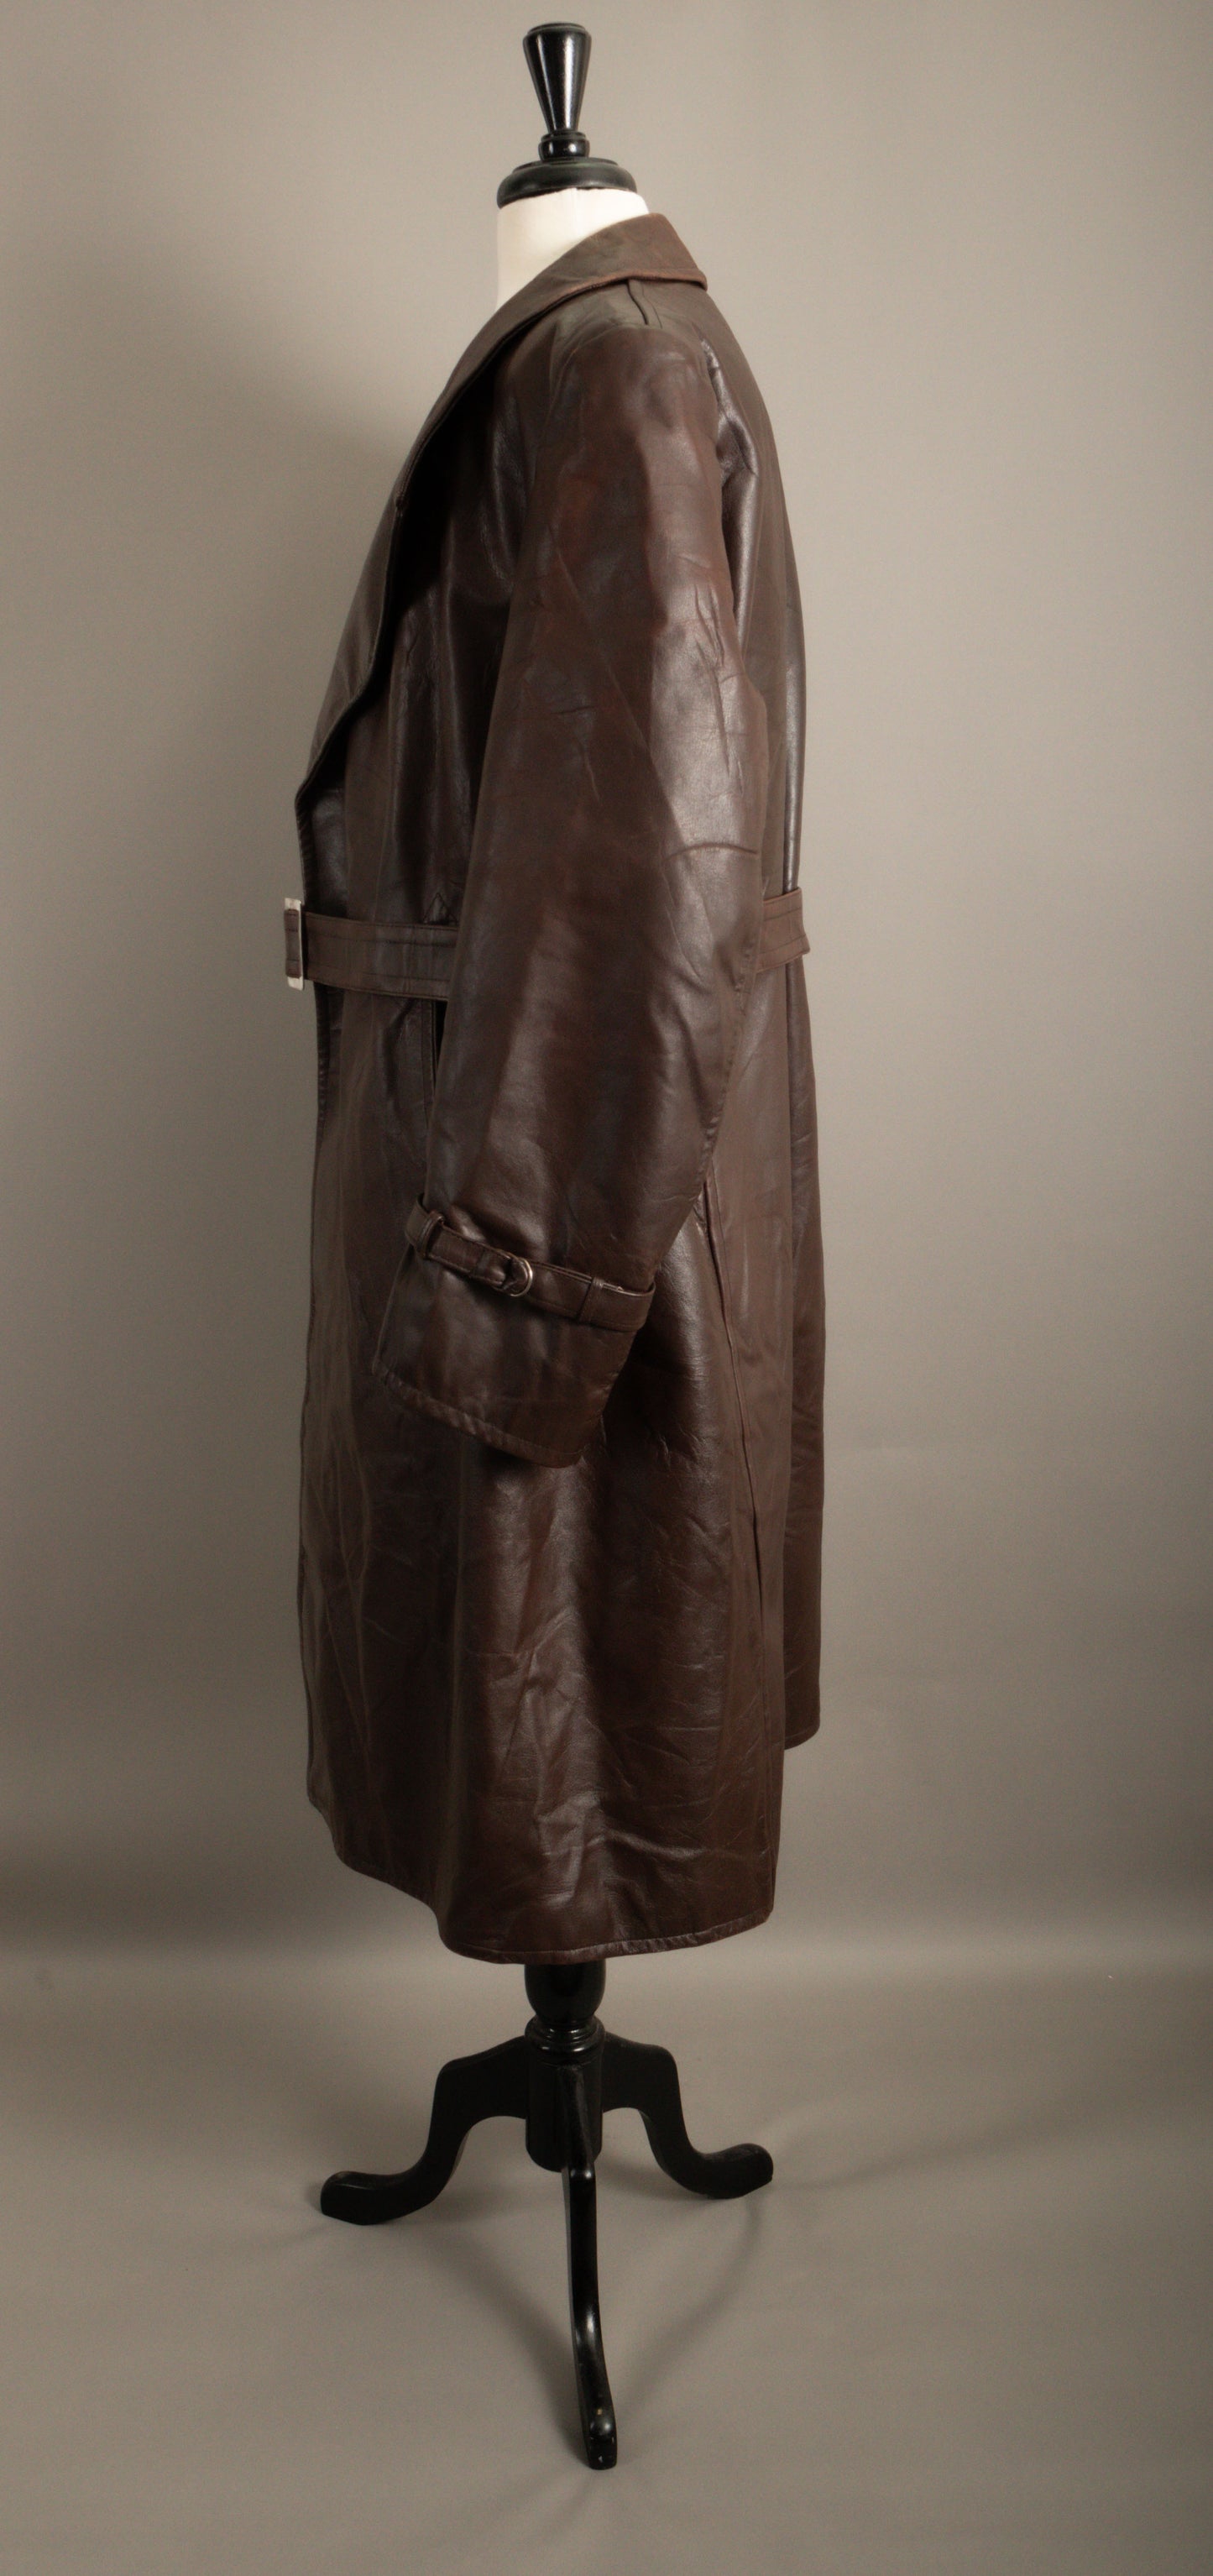 WW2 German Horsehide Leather Officers Trench Coat - Small (38-40)